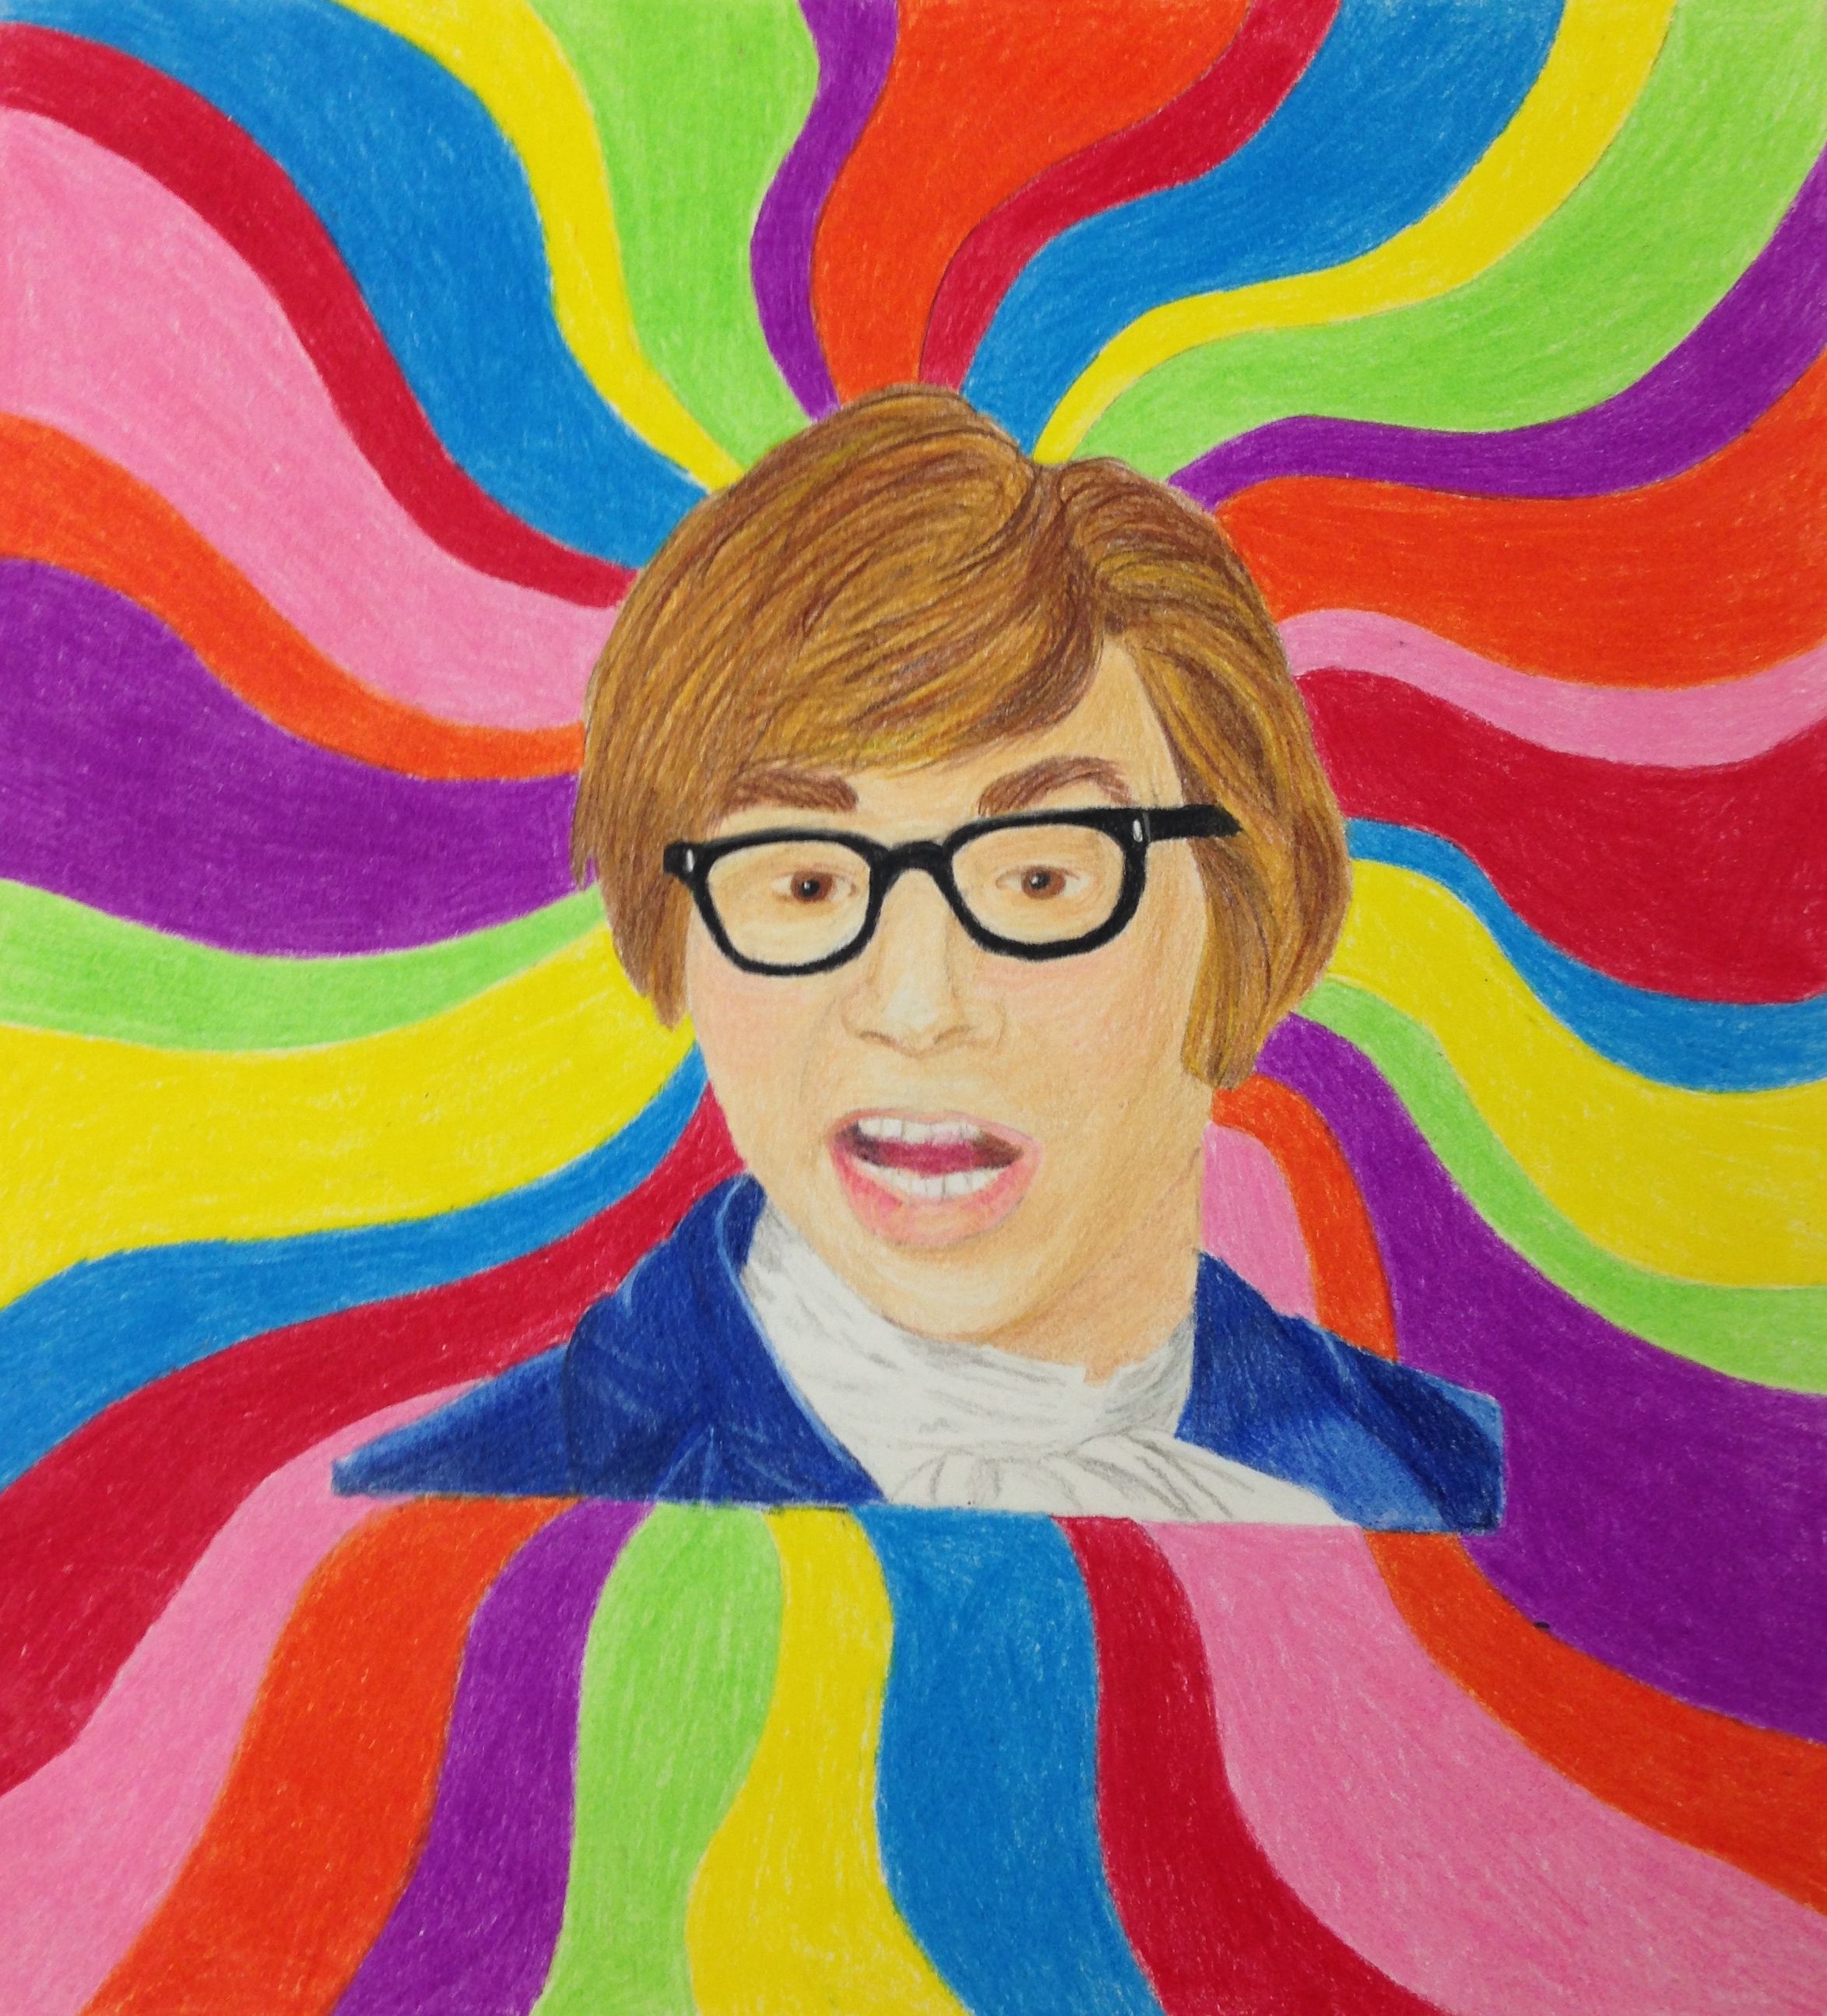 Austin Powers Wallpapers